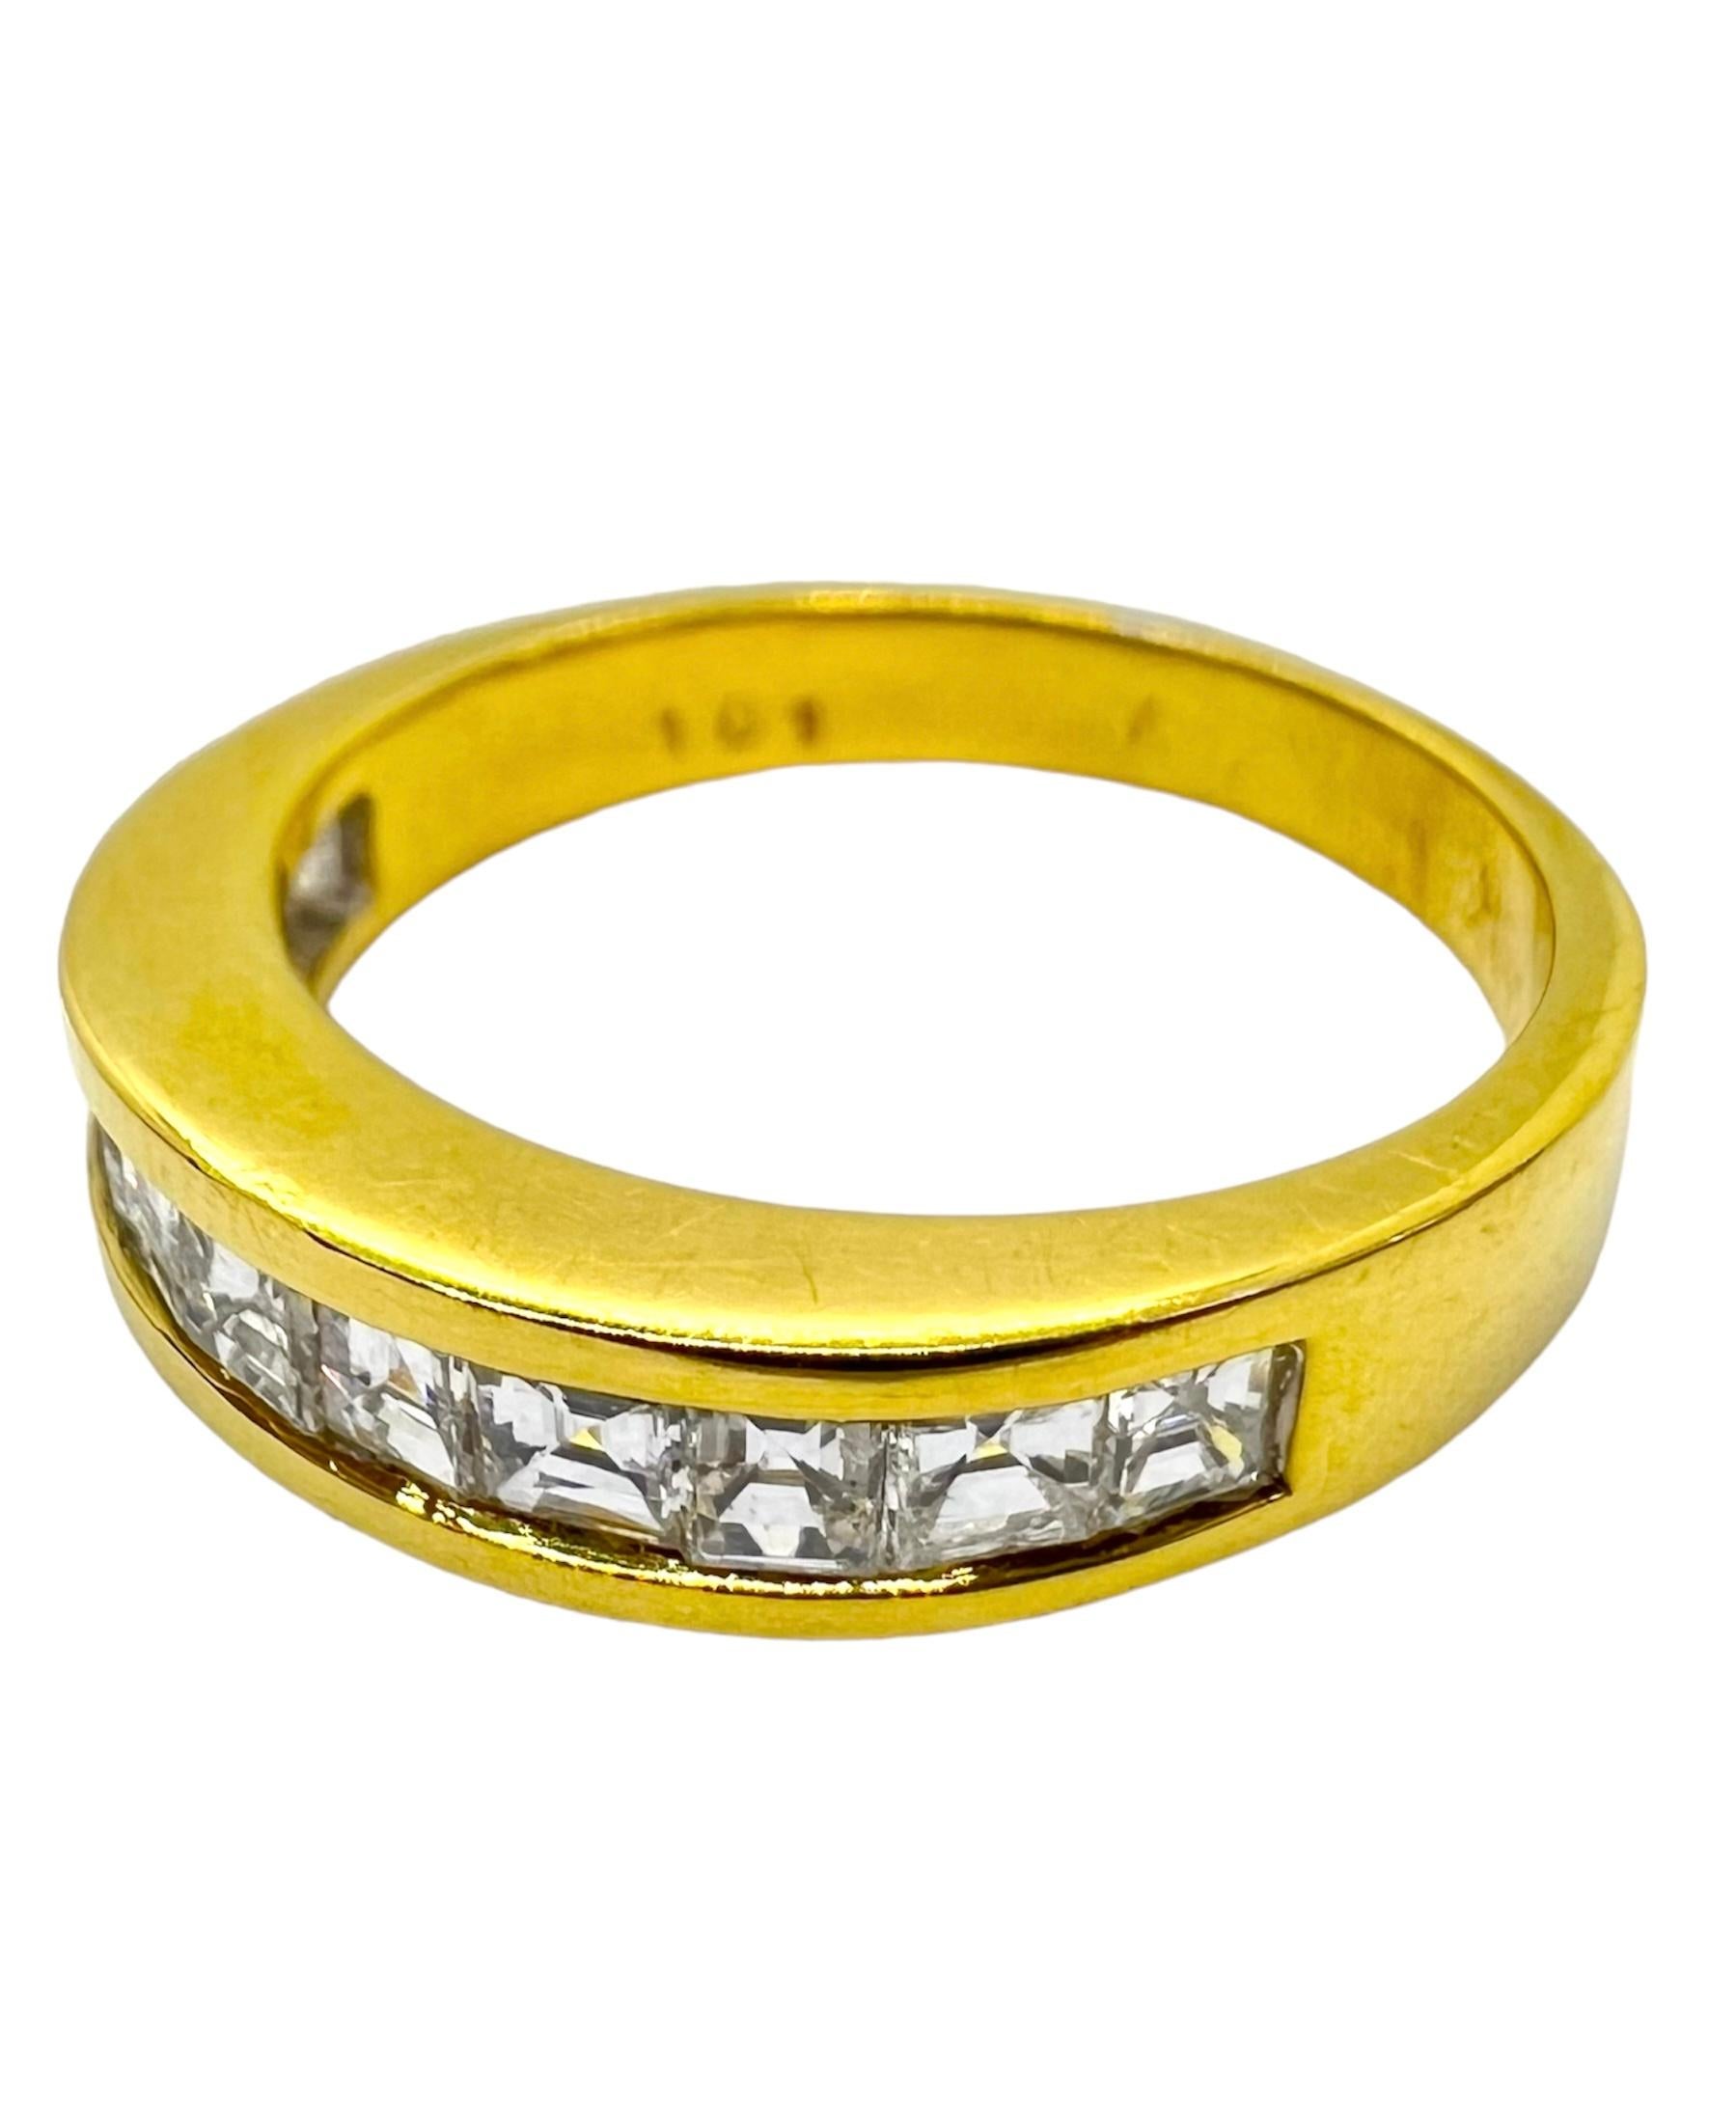 18K yellow gold ring with 1.01 carat of square cut diamonds.

Sophia D by Joseph Dardashti LTD has been known worldwide for 35 years and are inspired by classic Art Deco design that merges with modern manufacturing techniques.